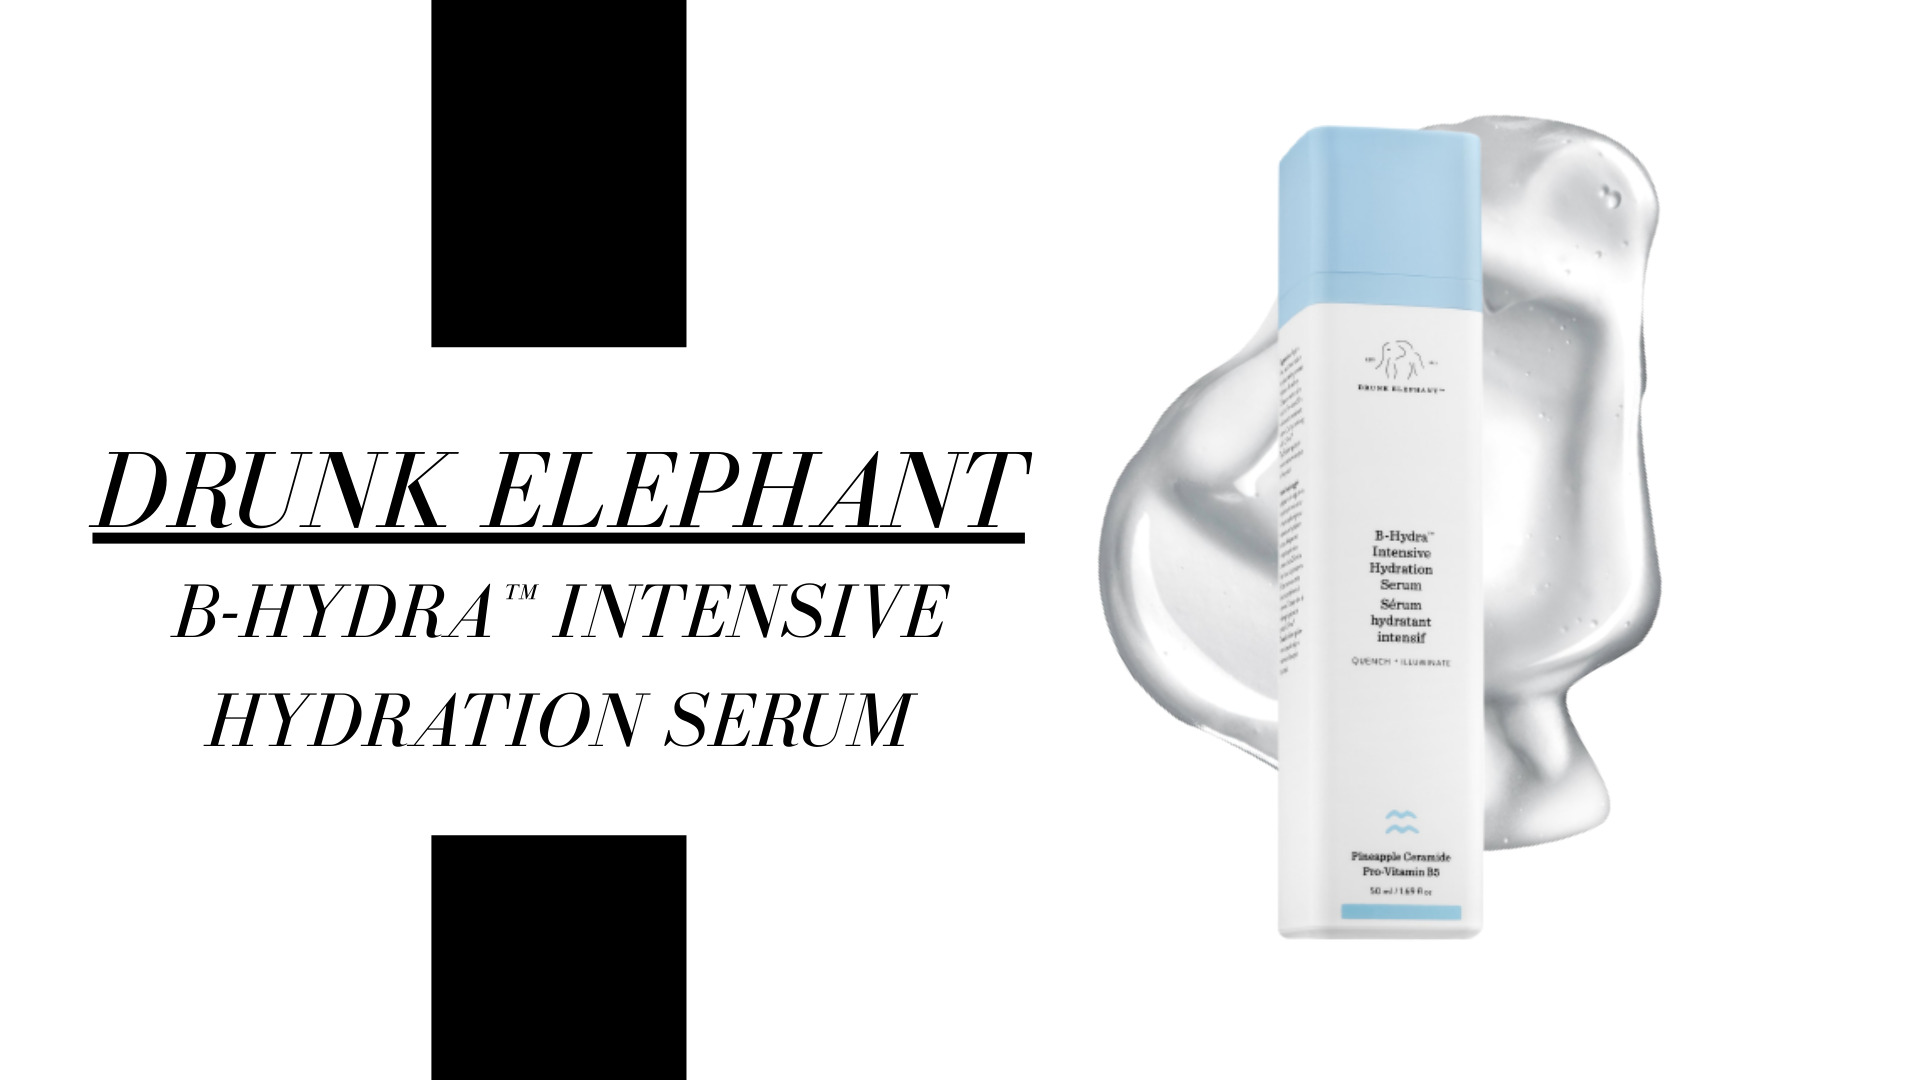 If you need a hydration boost, this is for you! It is an excellent product if your skincare concerns are fine lines and wrinkles, dryness, dullness, and uneven texture. This lightweight serum is formulated with ingredients like provitamin B5, pineapple ceramide, and a lentil/apple/watermelon complex.